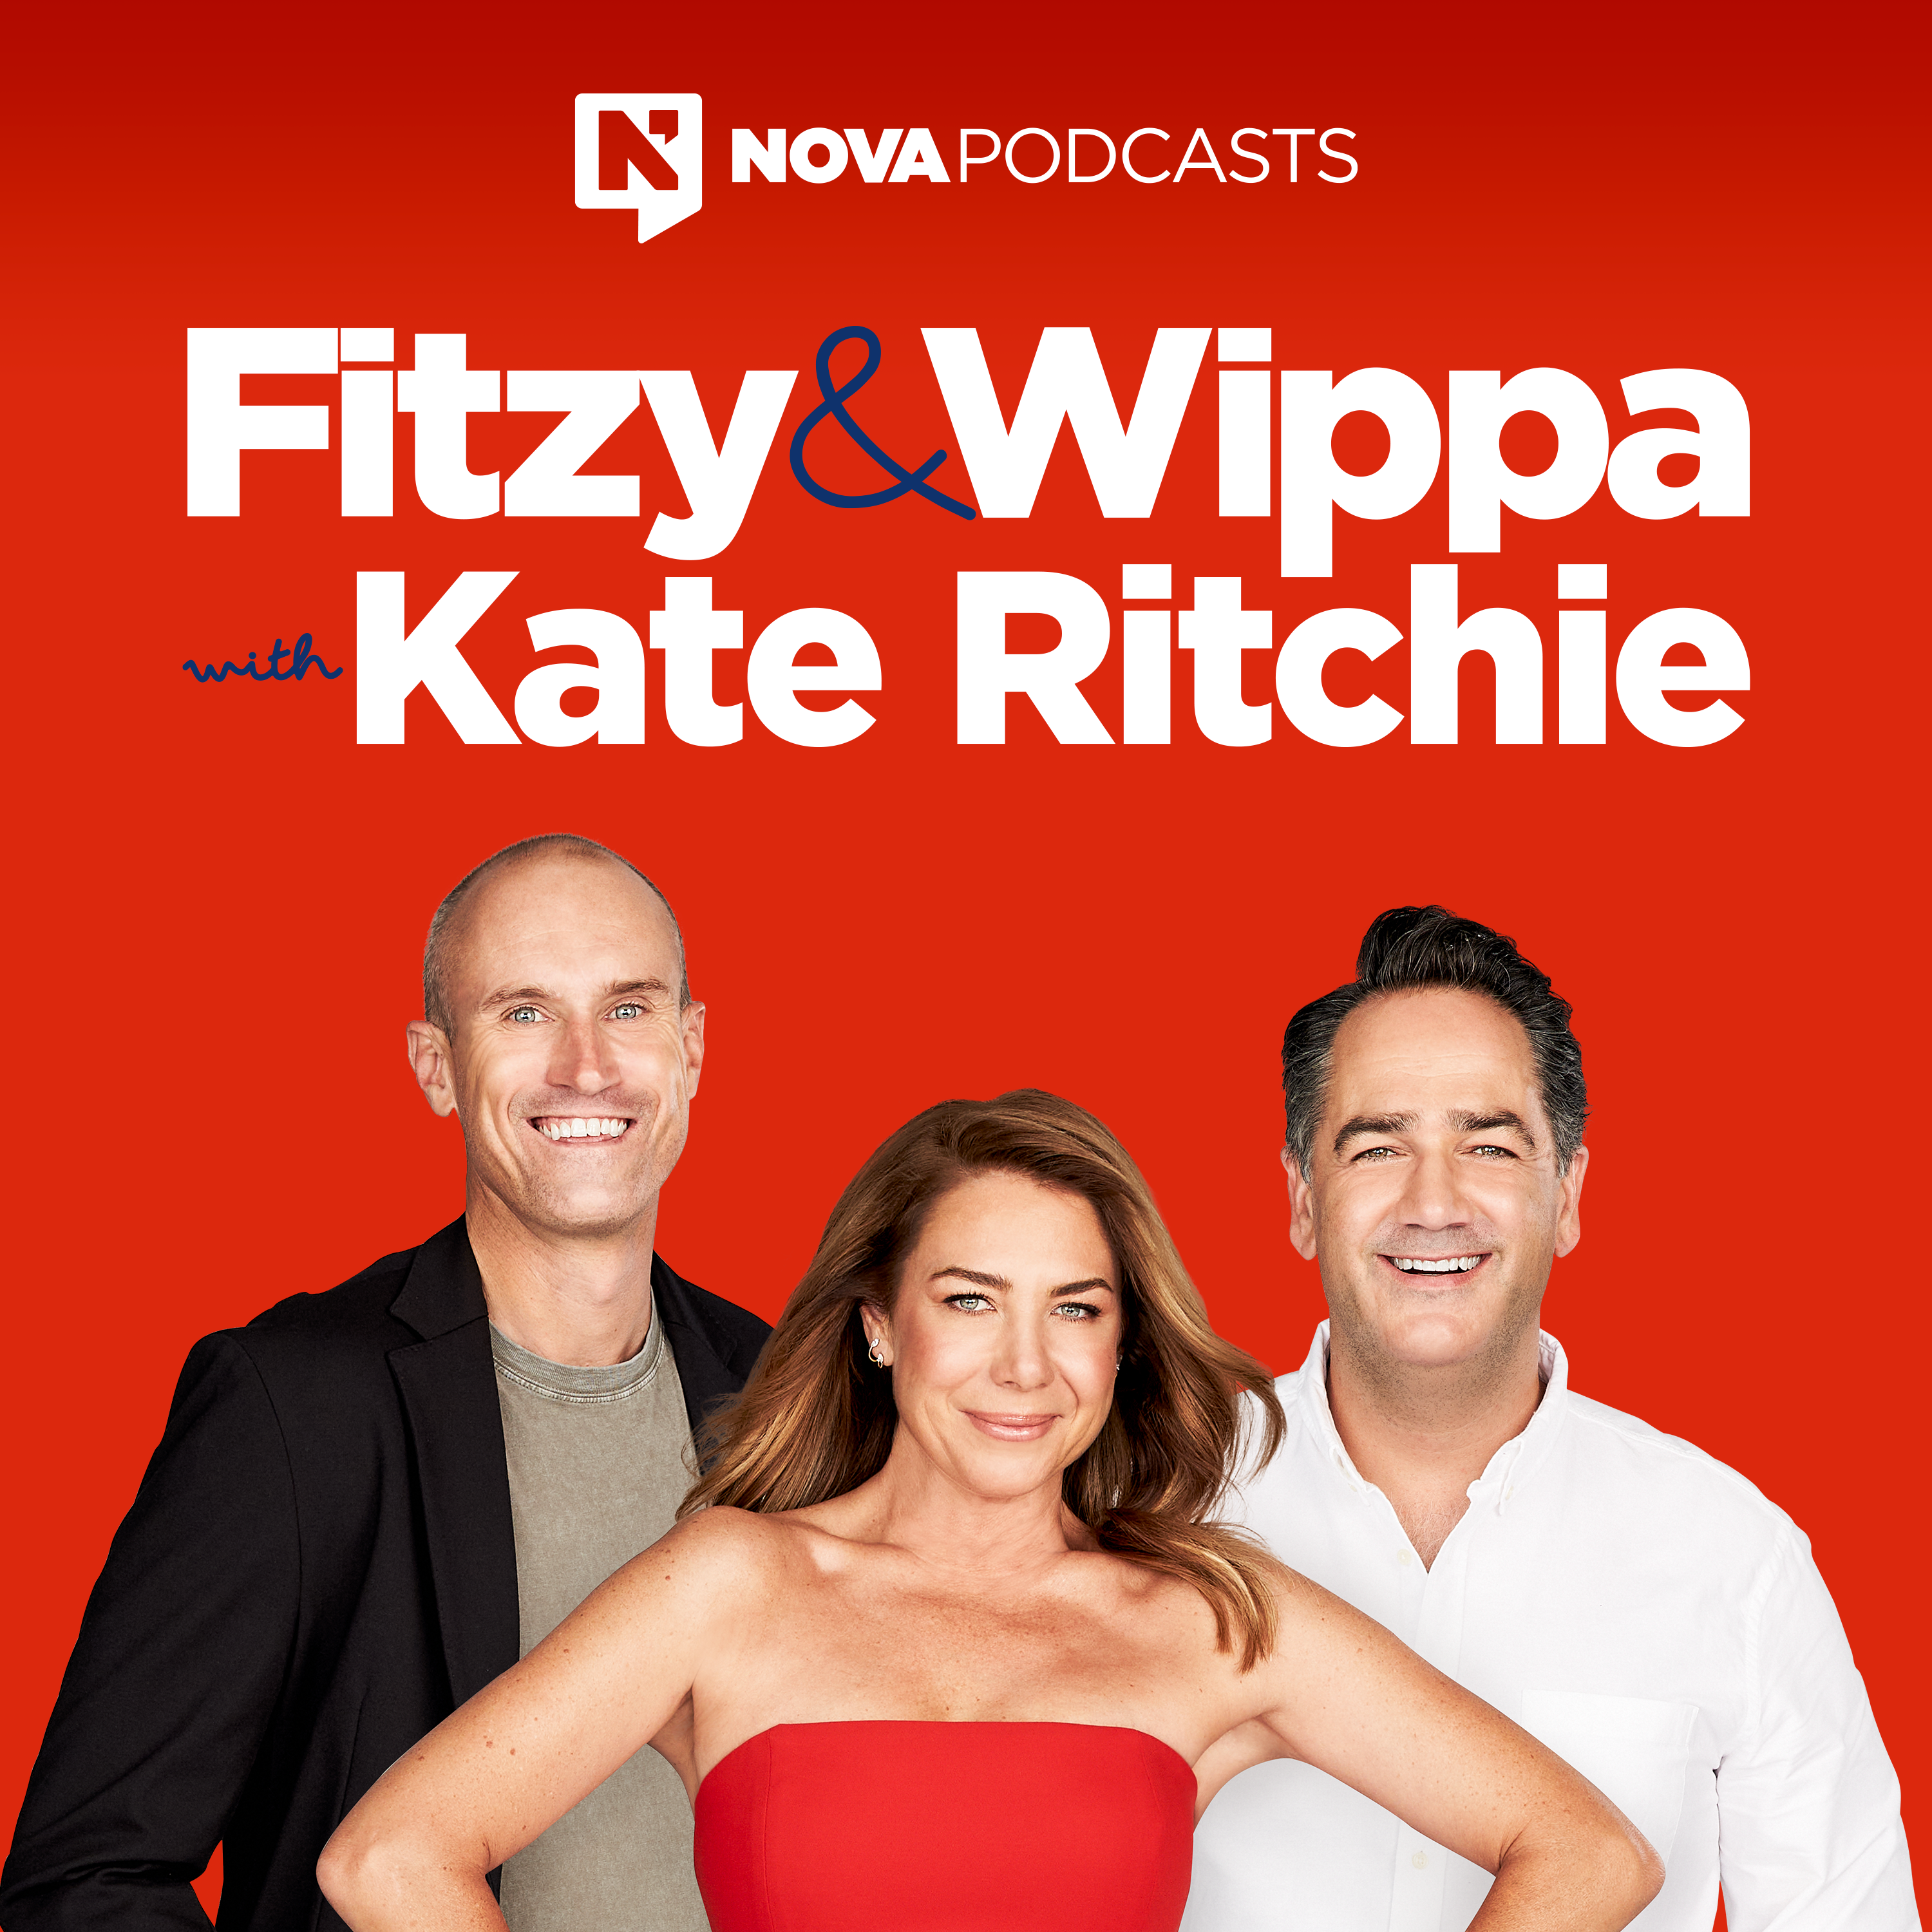 Sam Pang And Tom Gleisner Reveal Why They Don’t Want Fitz & Wip On HYBPA?